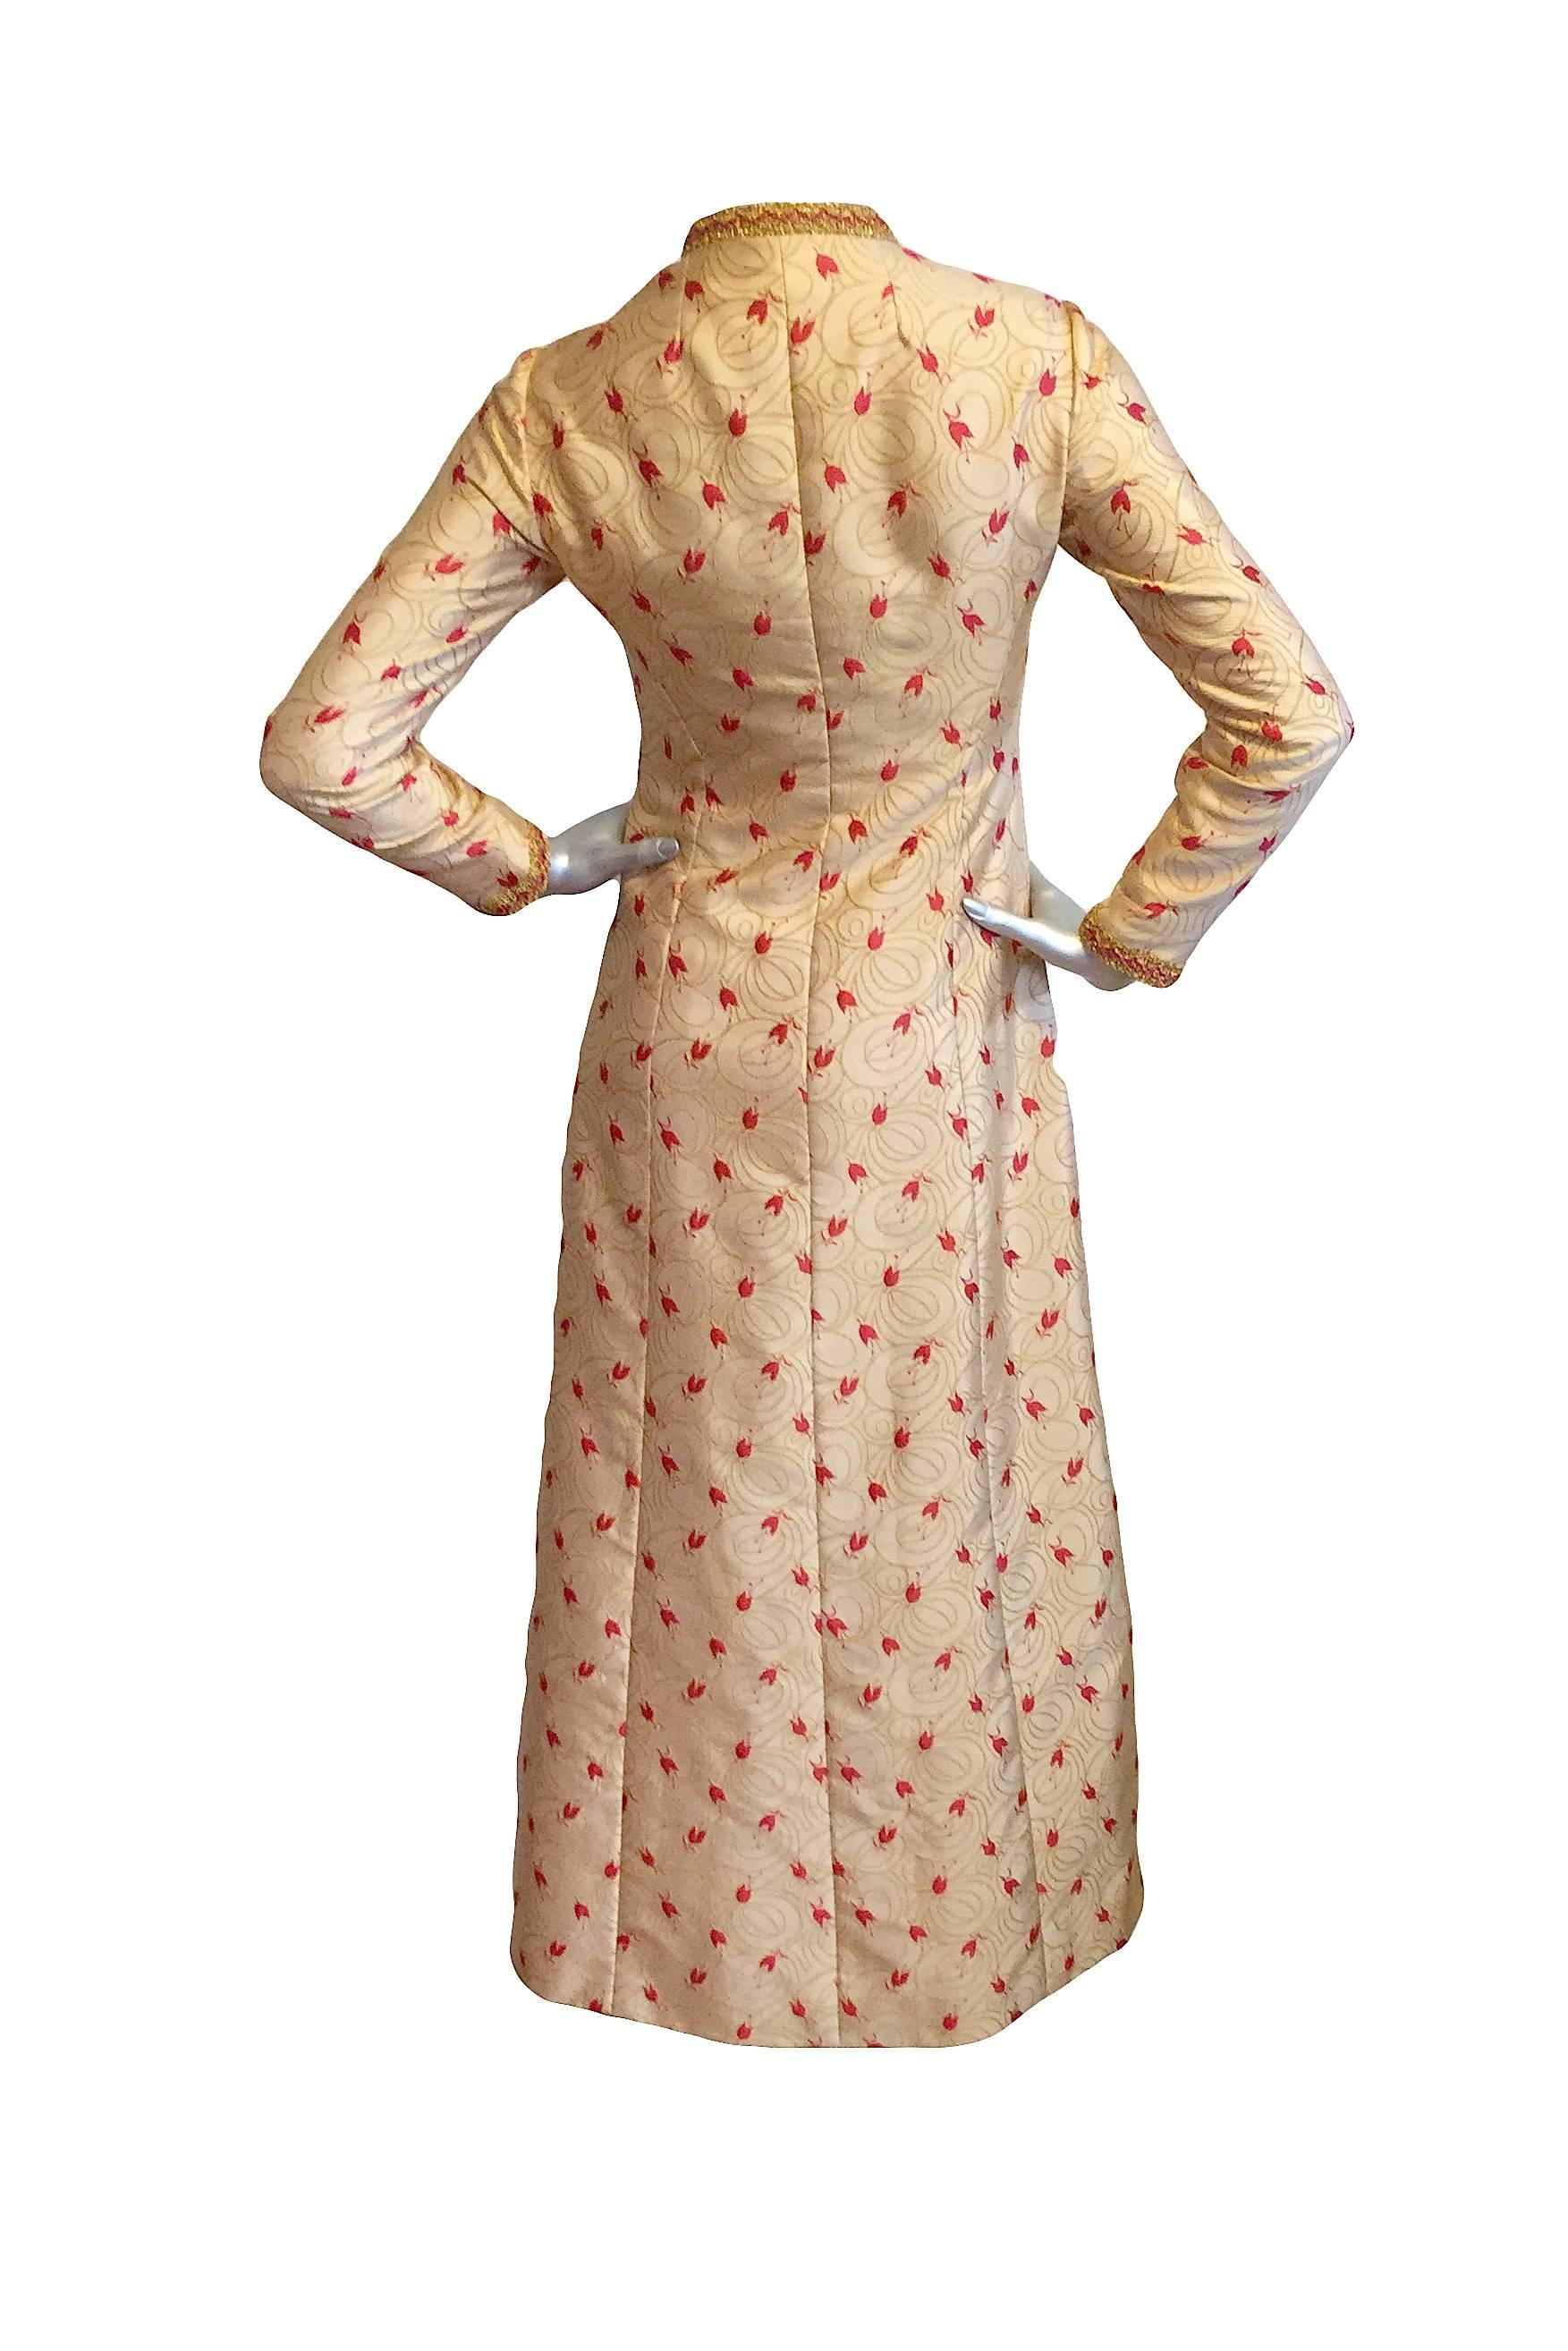 Rare Adele Simpson Brocade Gown, Circa 1960 In Good Condition For Sale In Bethesda, MD